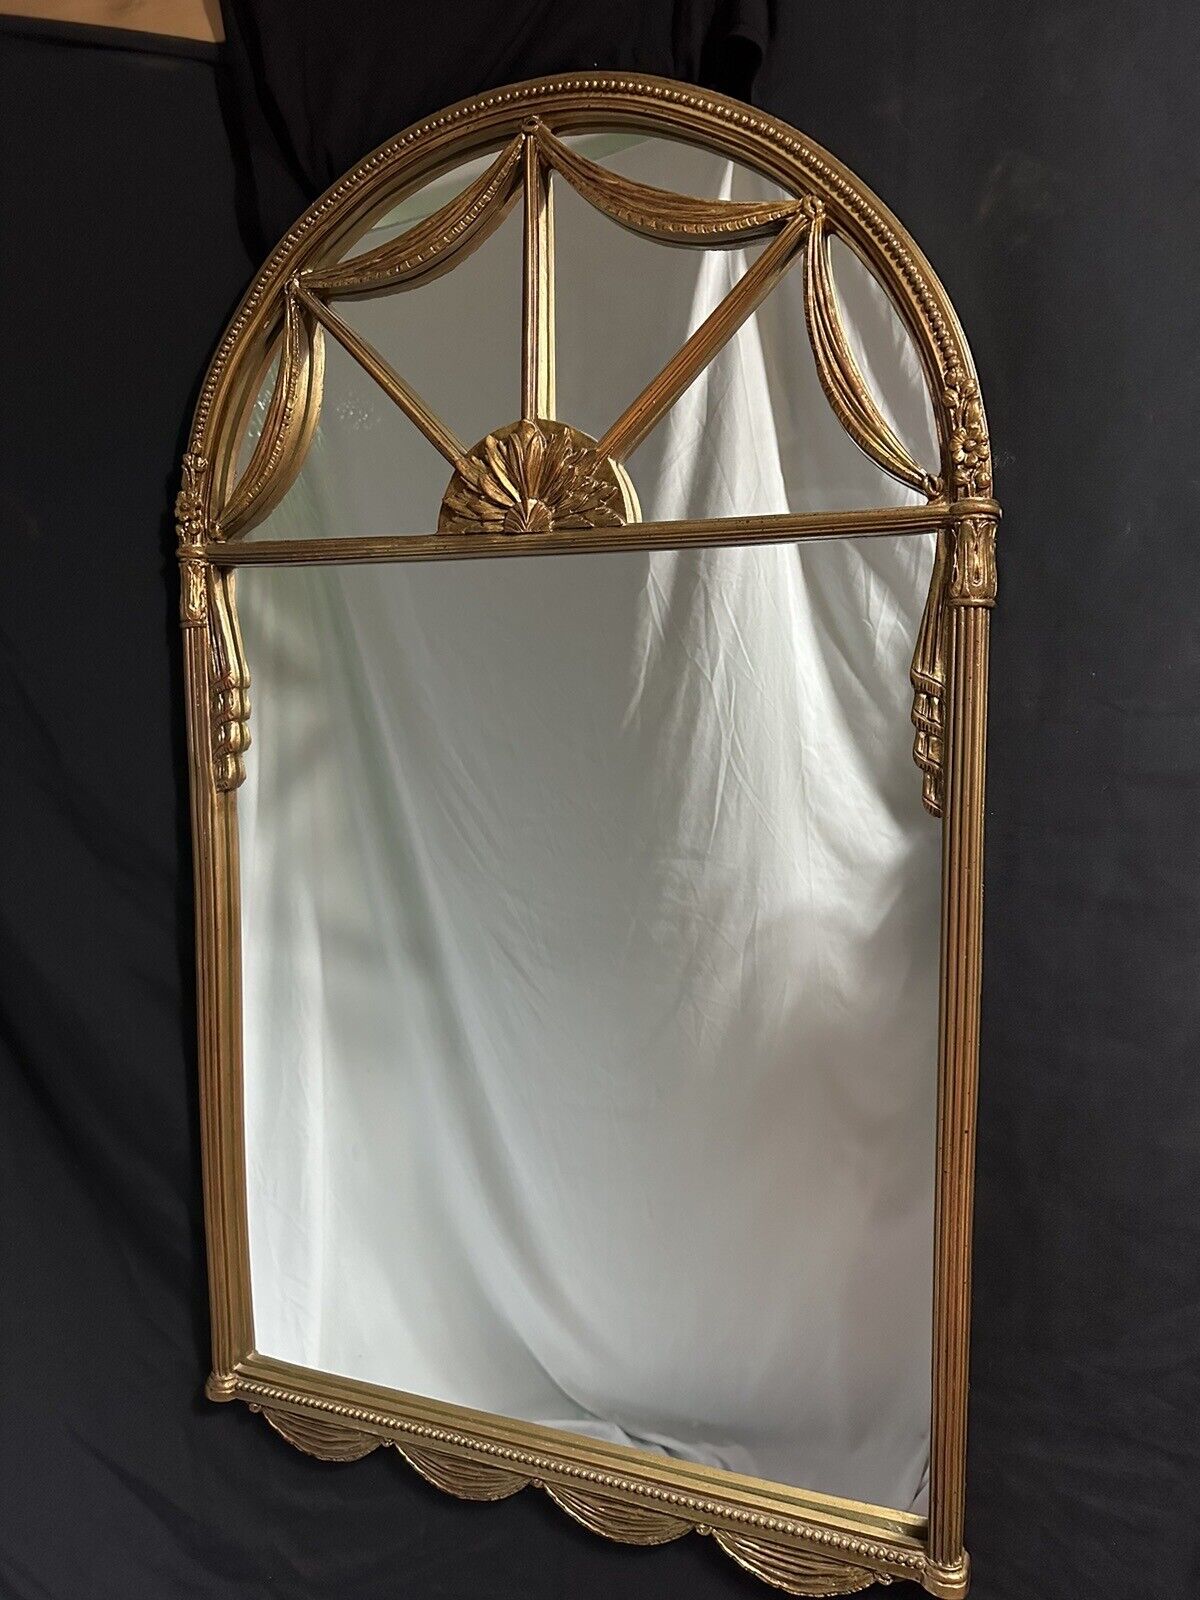 Antique Hollywood Regency Giltwood Arched Wall Mirror 46” H x 26.5” L